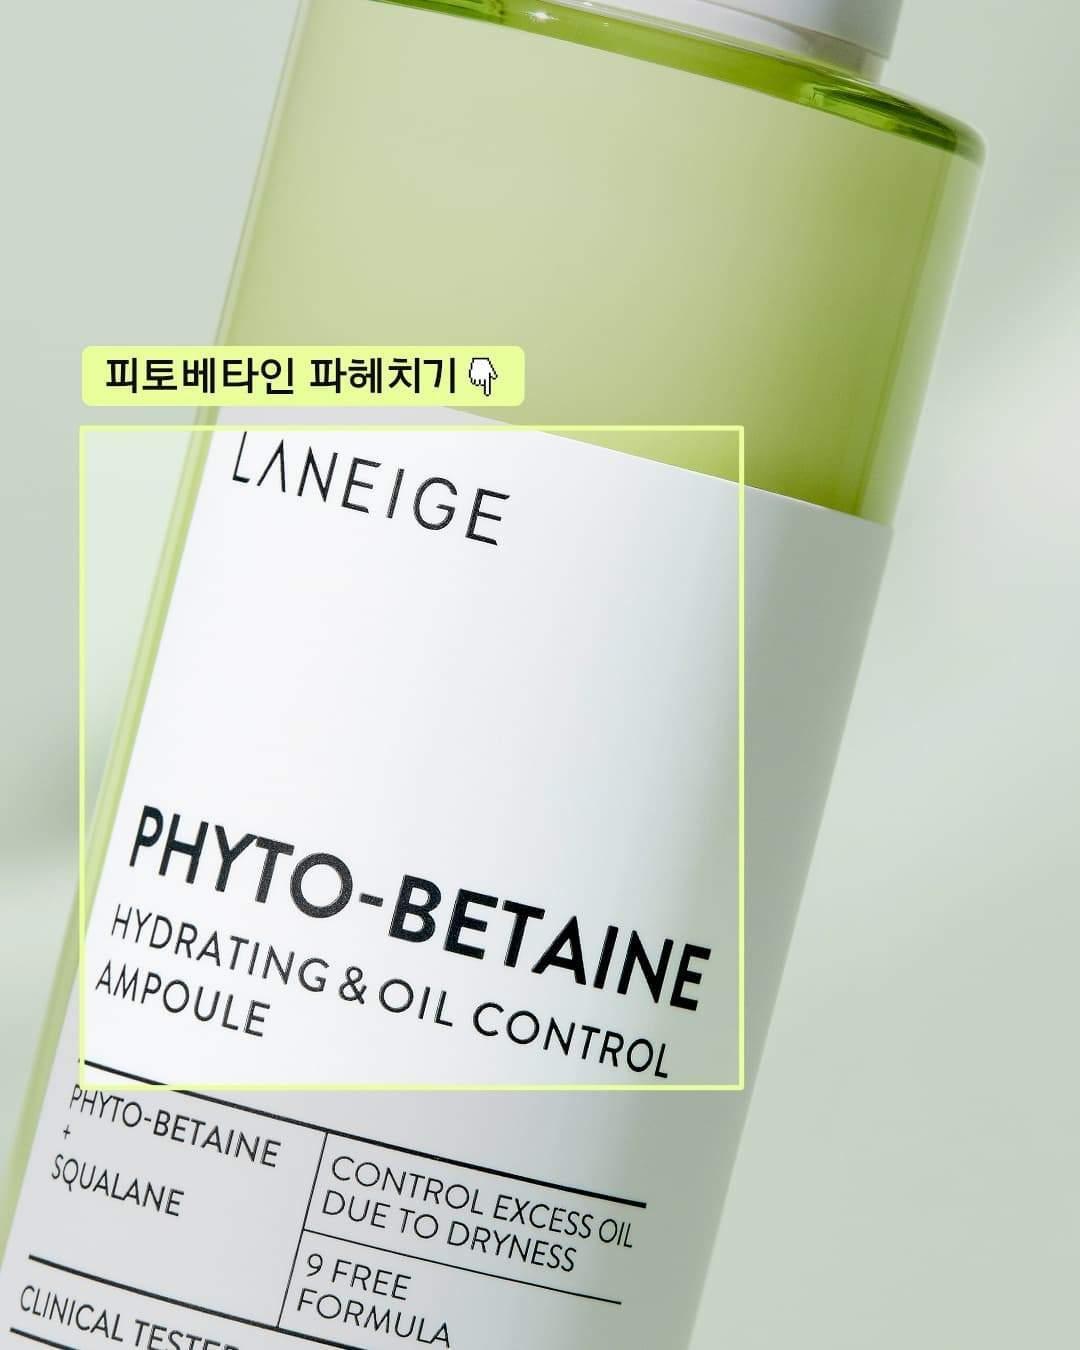 Tinh Chất Laneige Phytobetaine Hydrating & Oil Control Ampoule - Kallos Vietnam